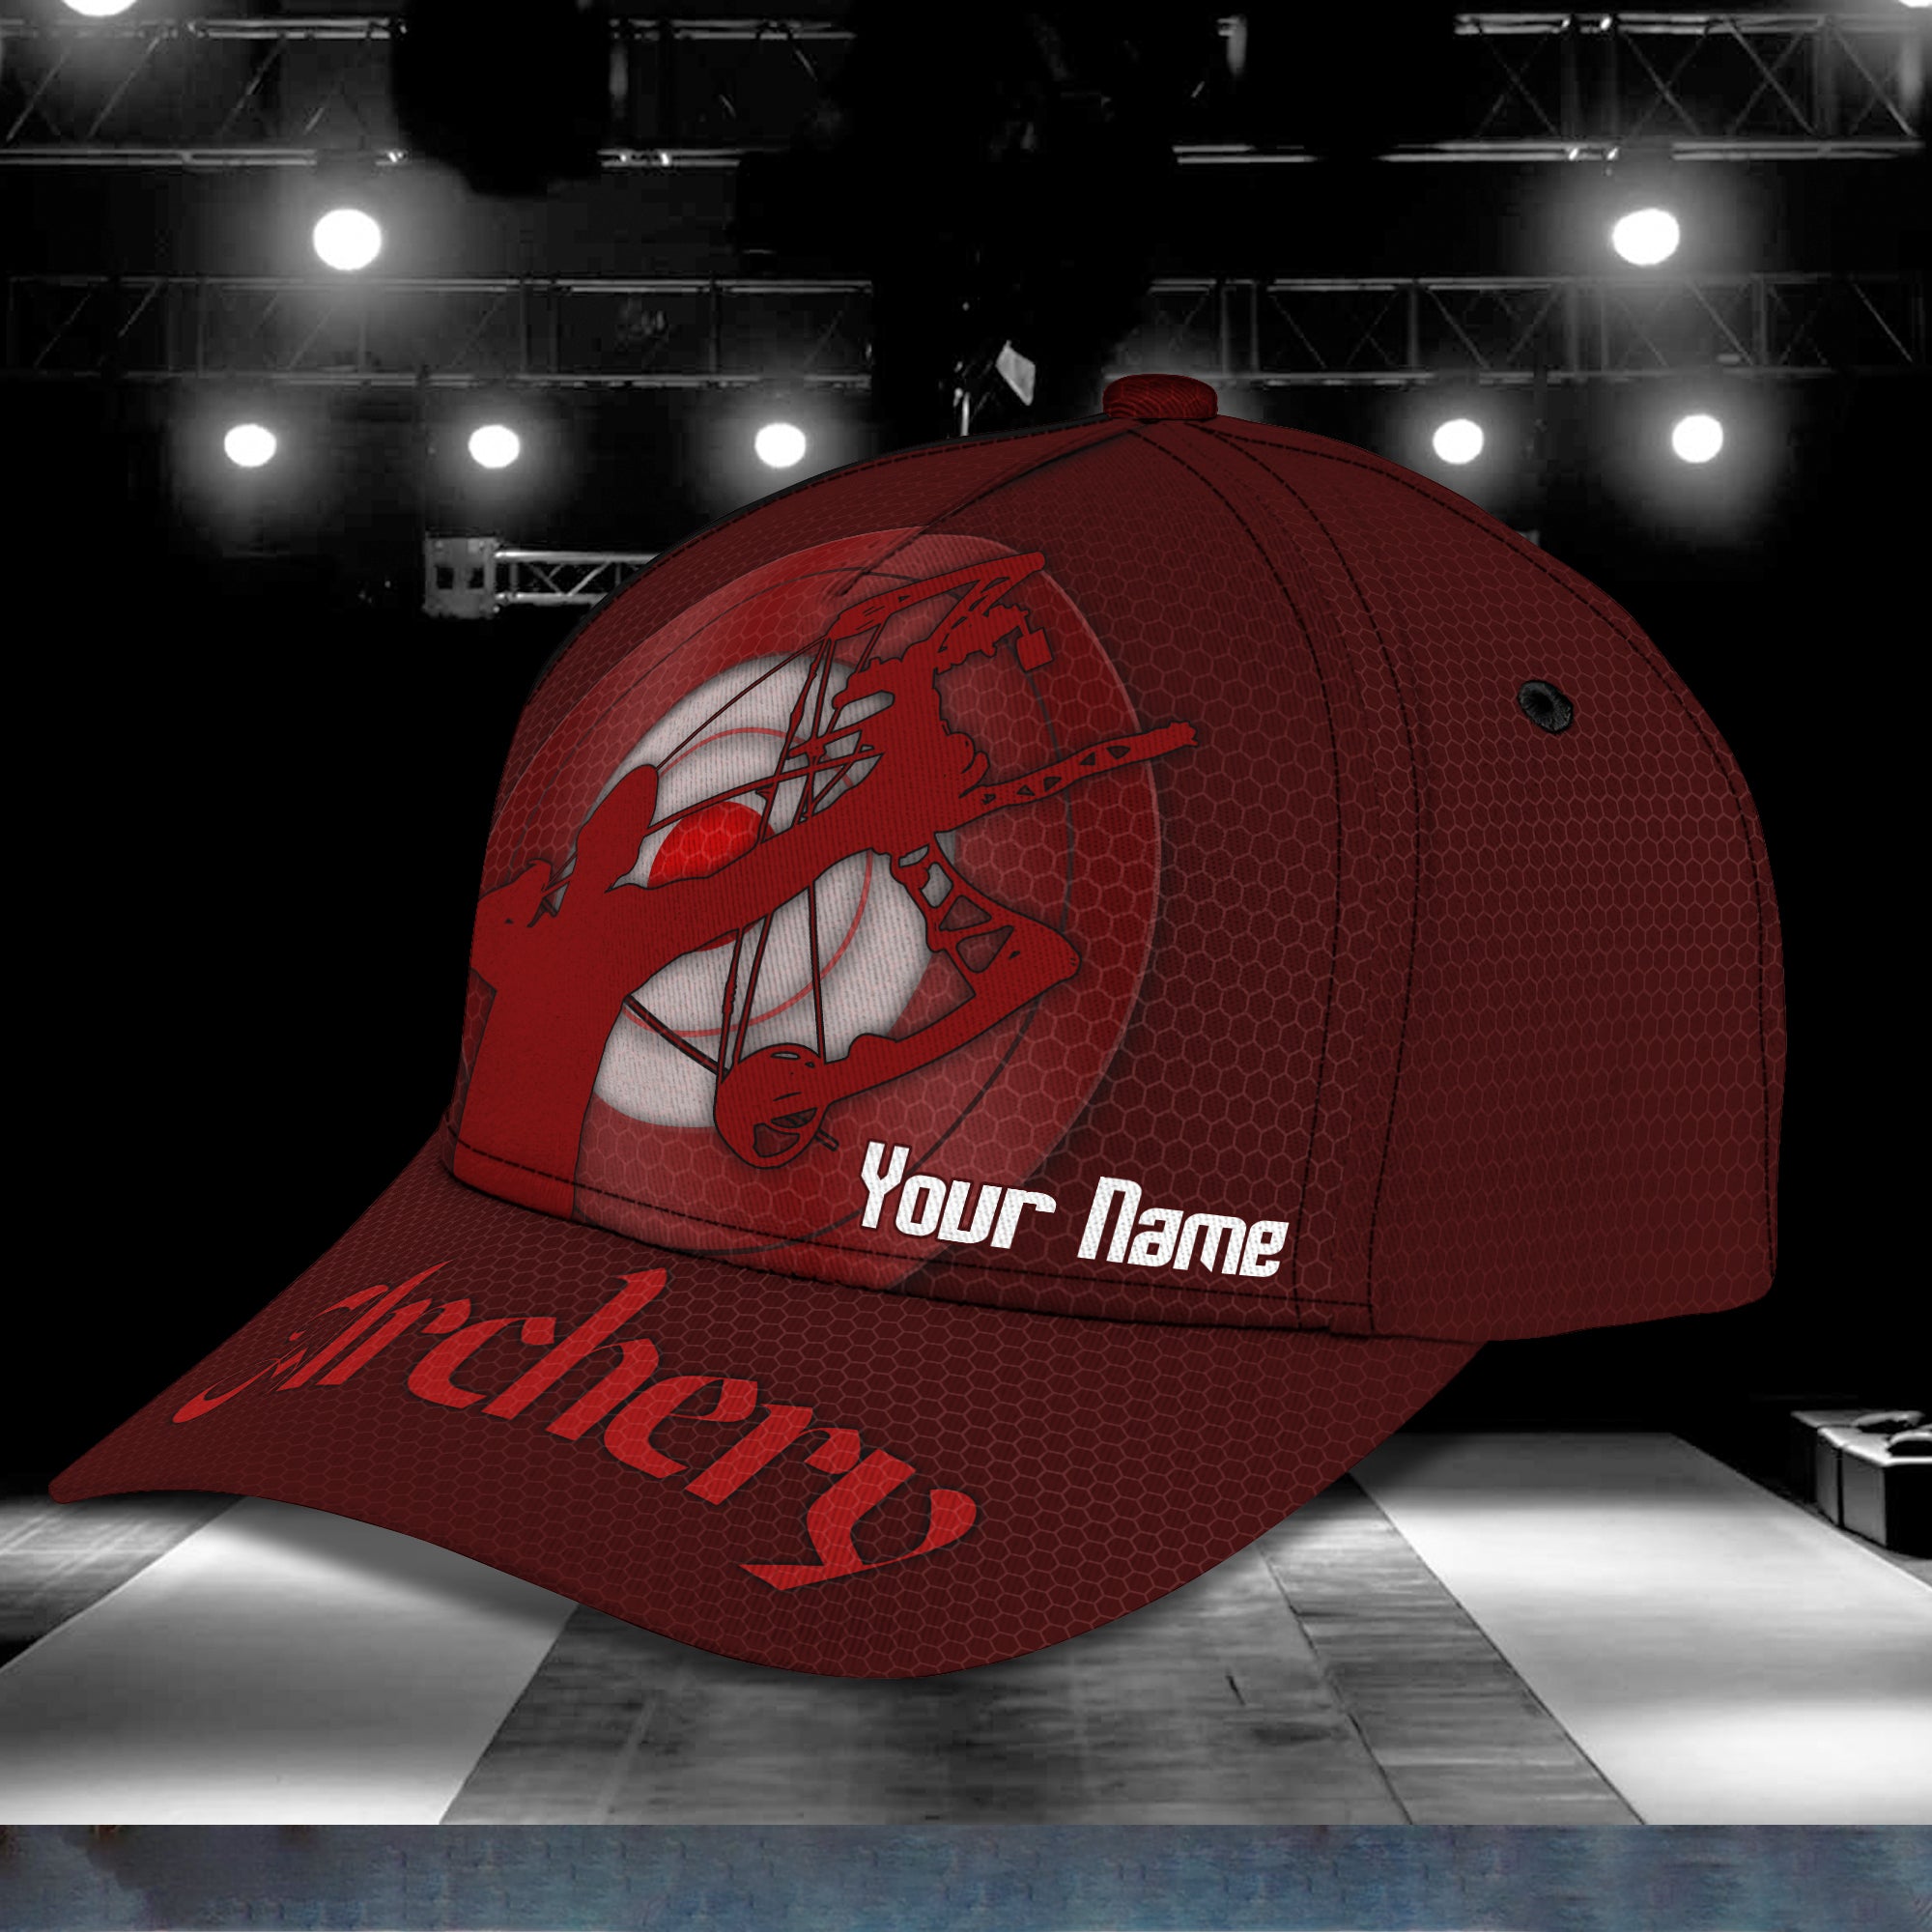 Archery Red - Personalized Name Cap 45 - Nvc97